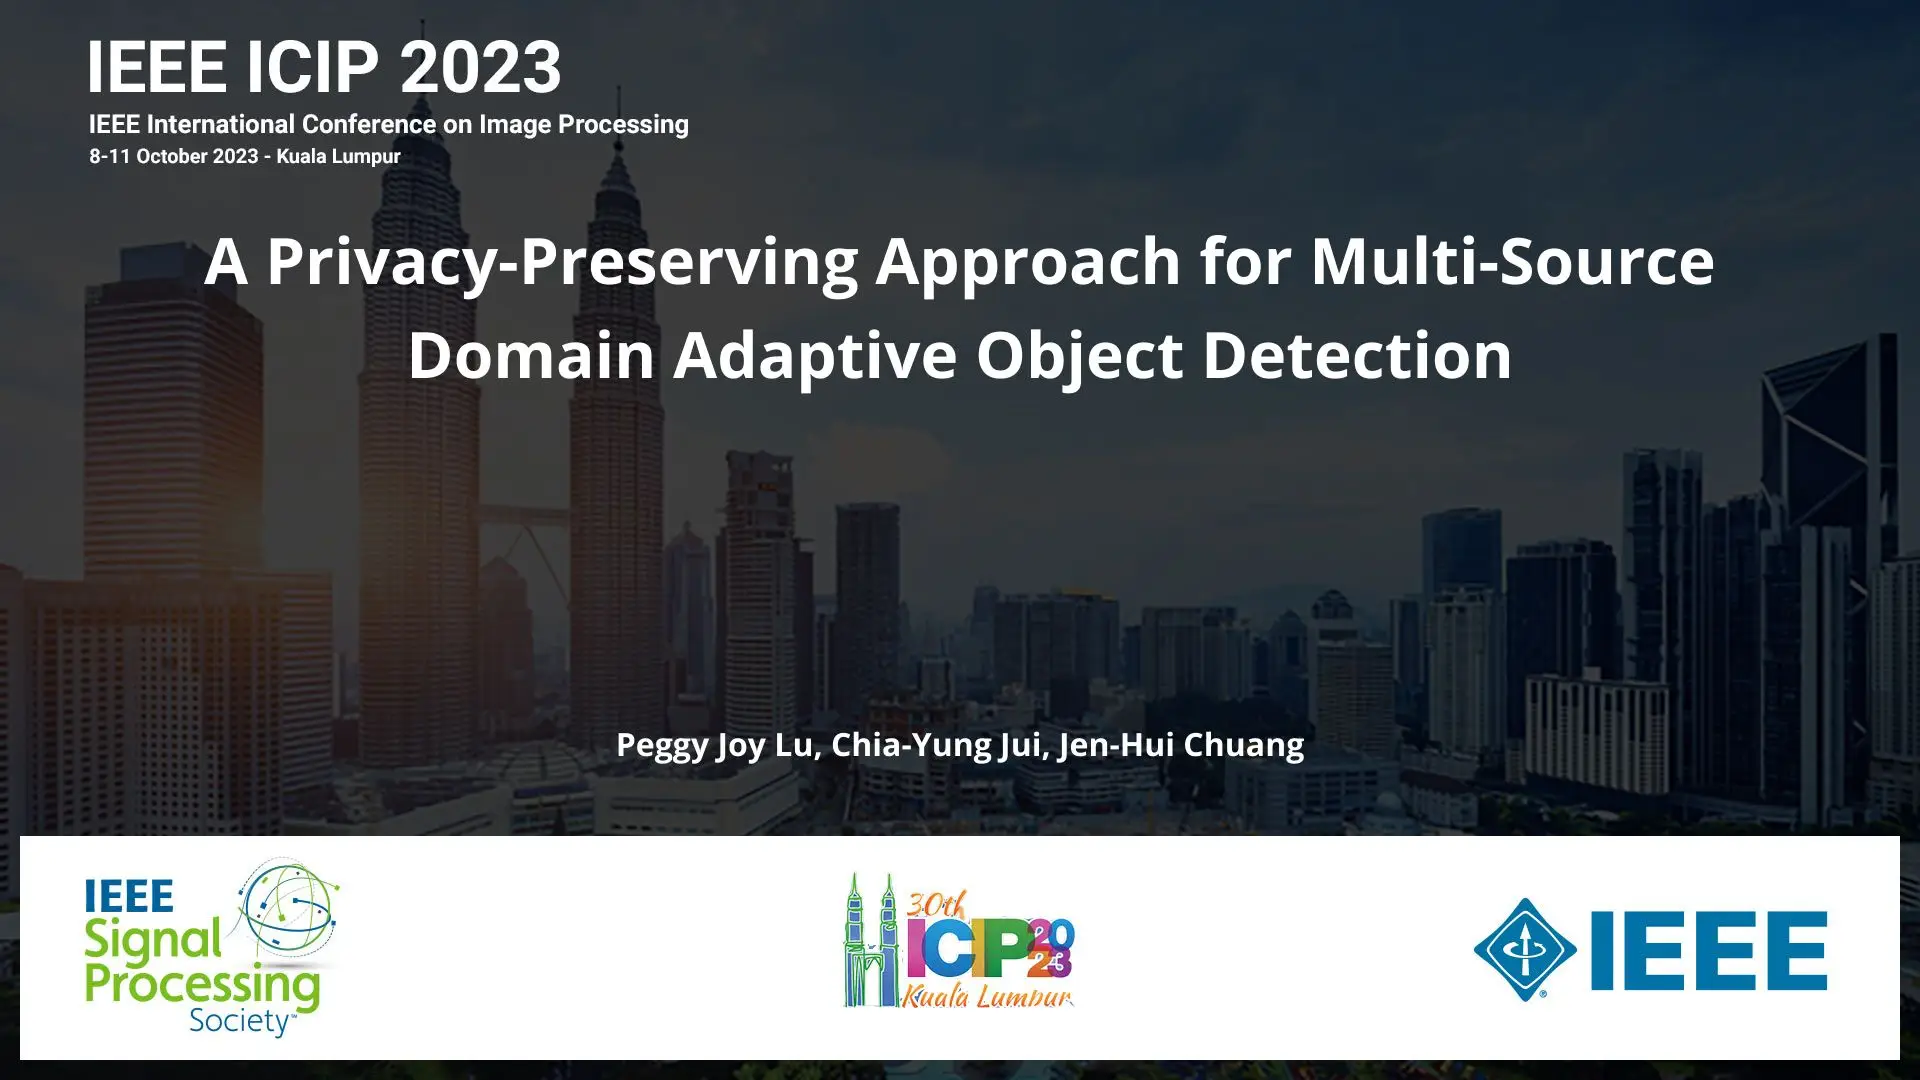 A Privacy-Preserving Approach for Multi-Source Domain Adaptive Object Detection